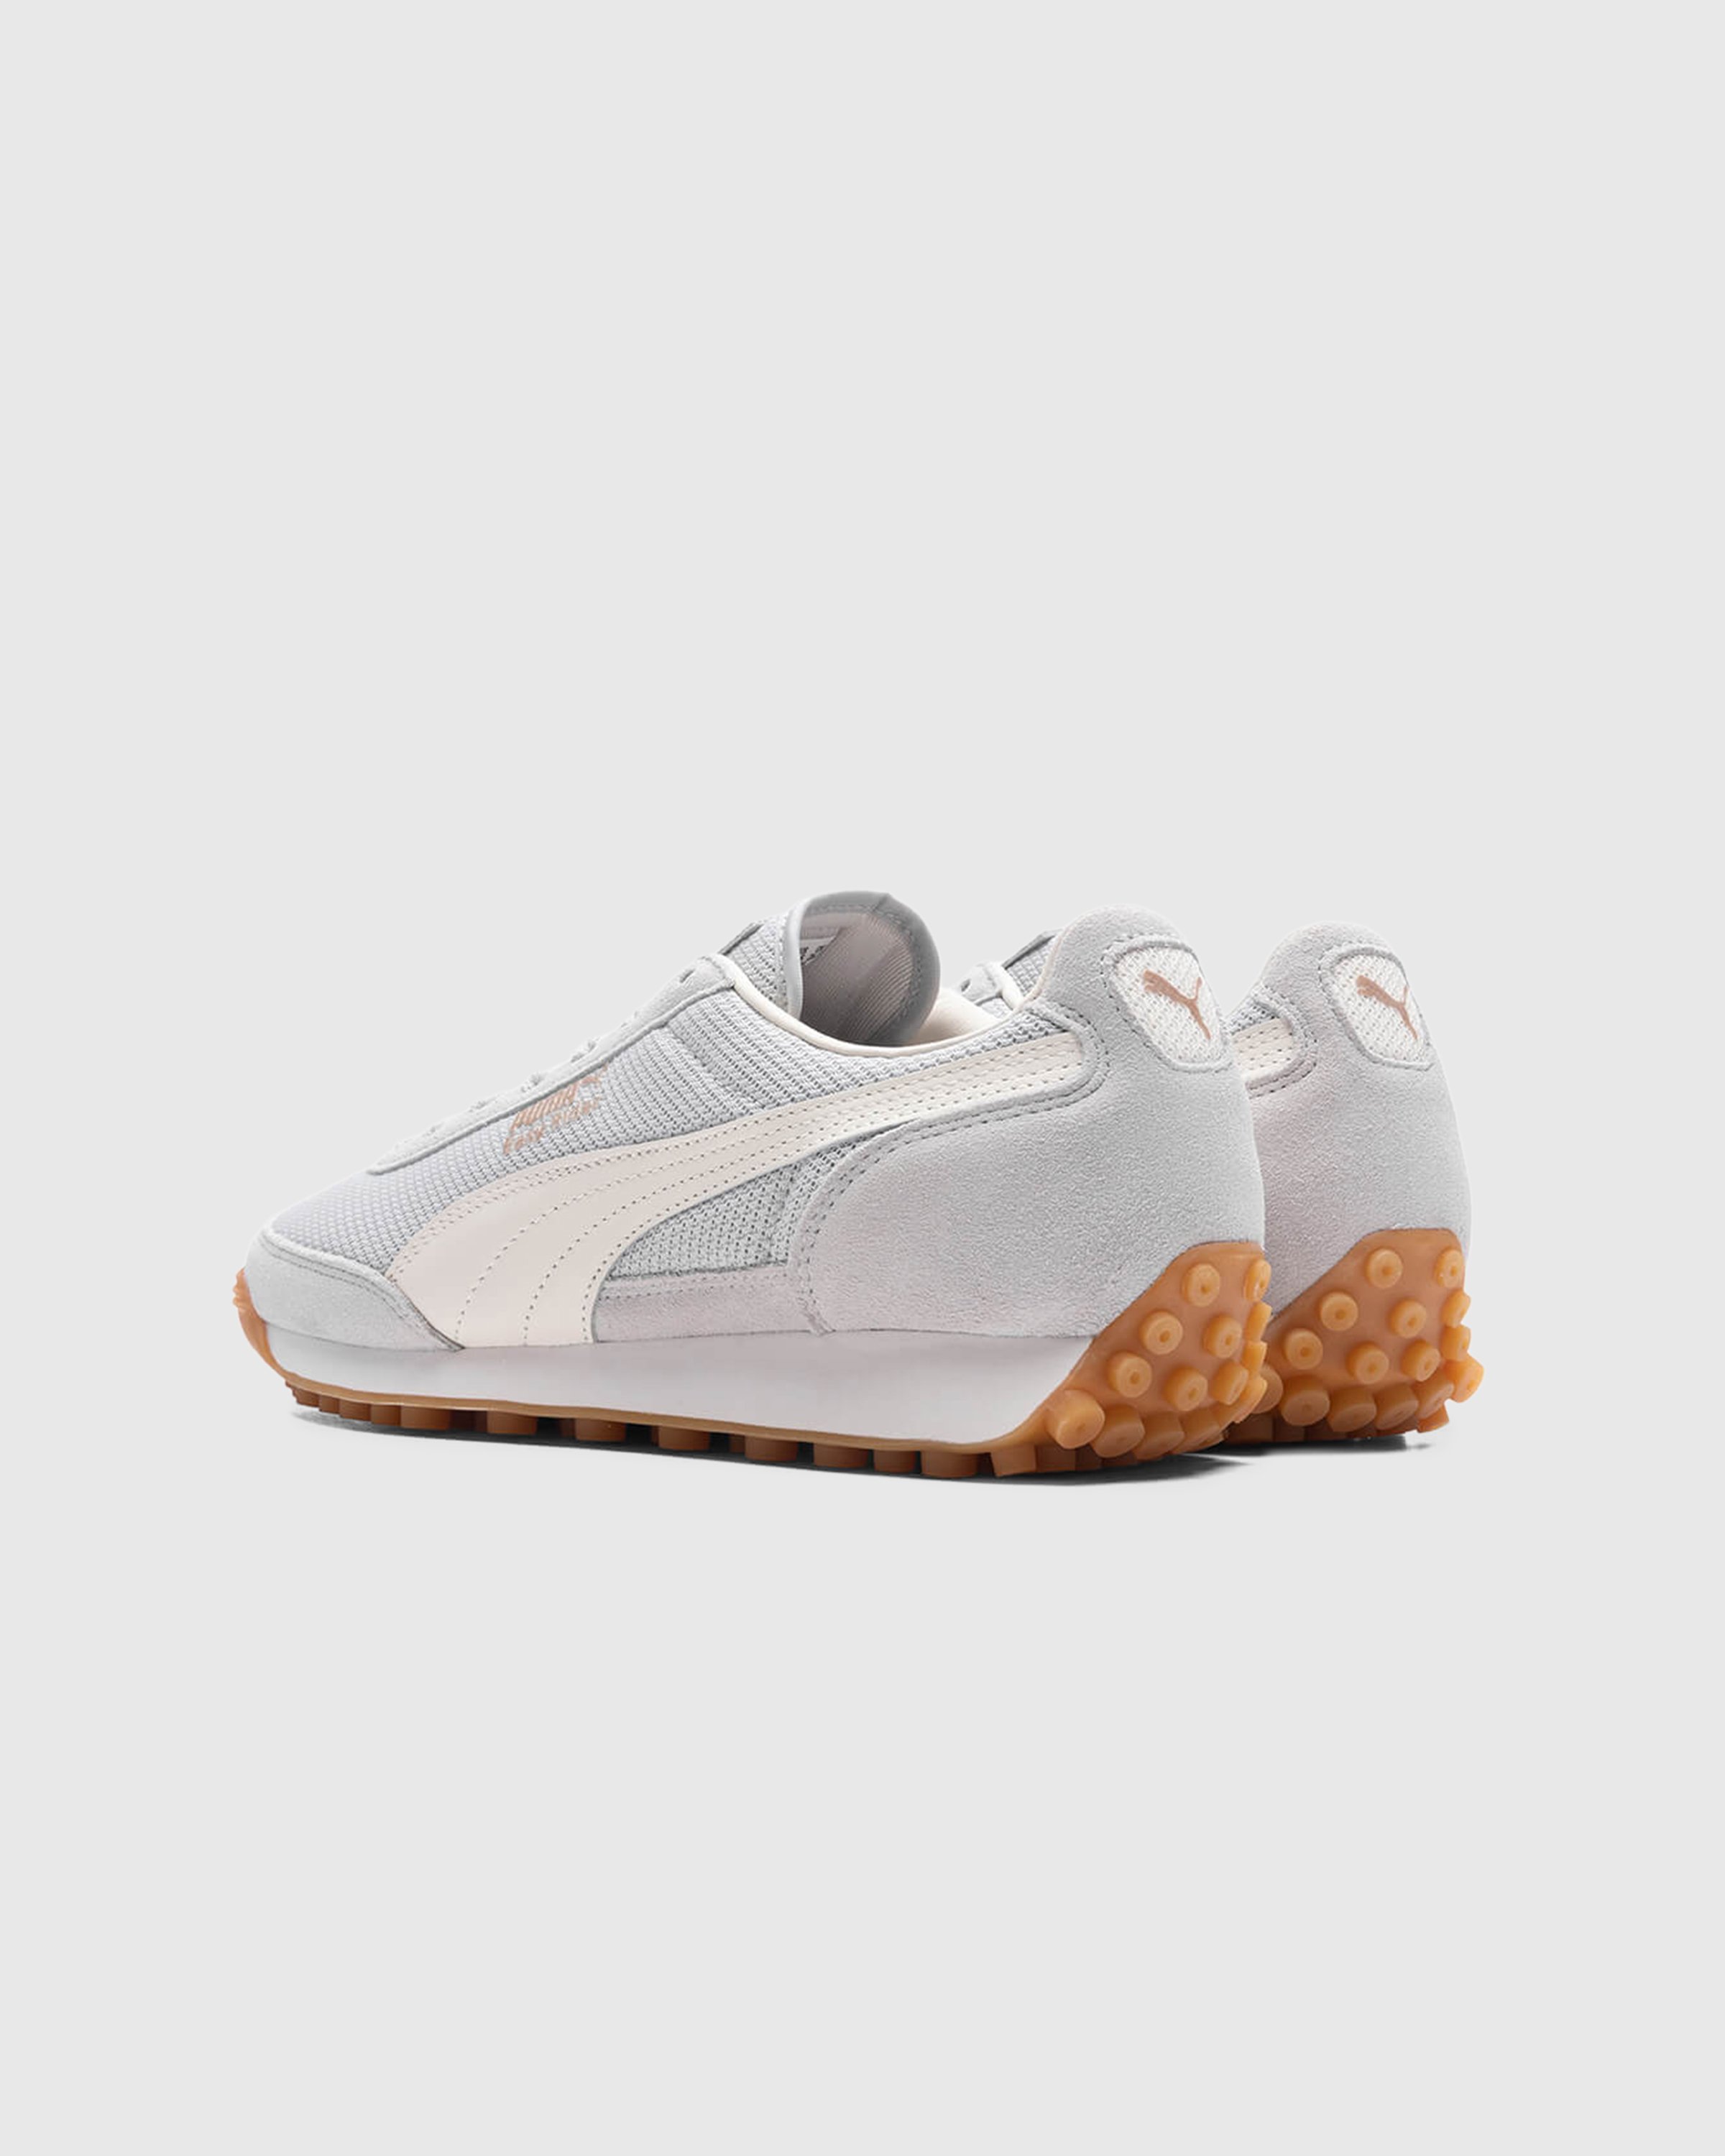 Puma - Easy Rider Premium Glacial Gray-Frosted Ivory - Footwear - Grey - Image 3